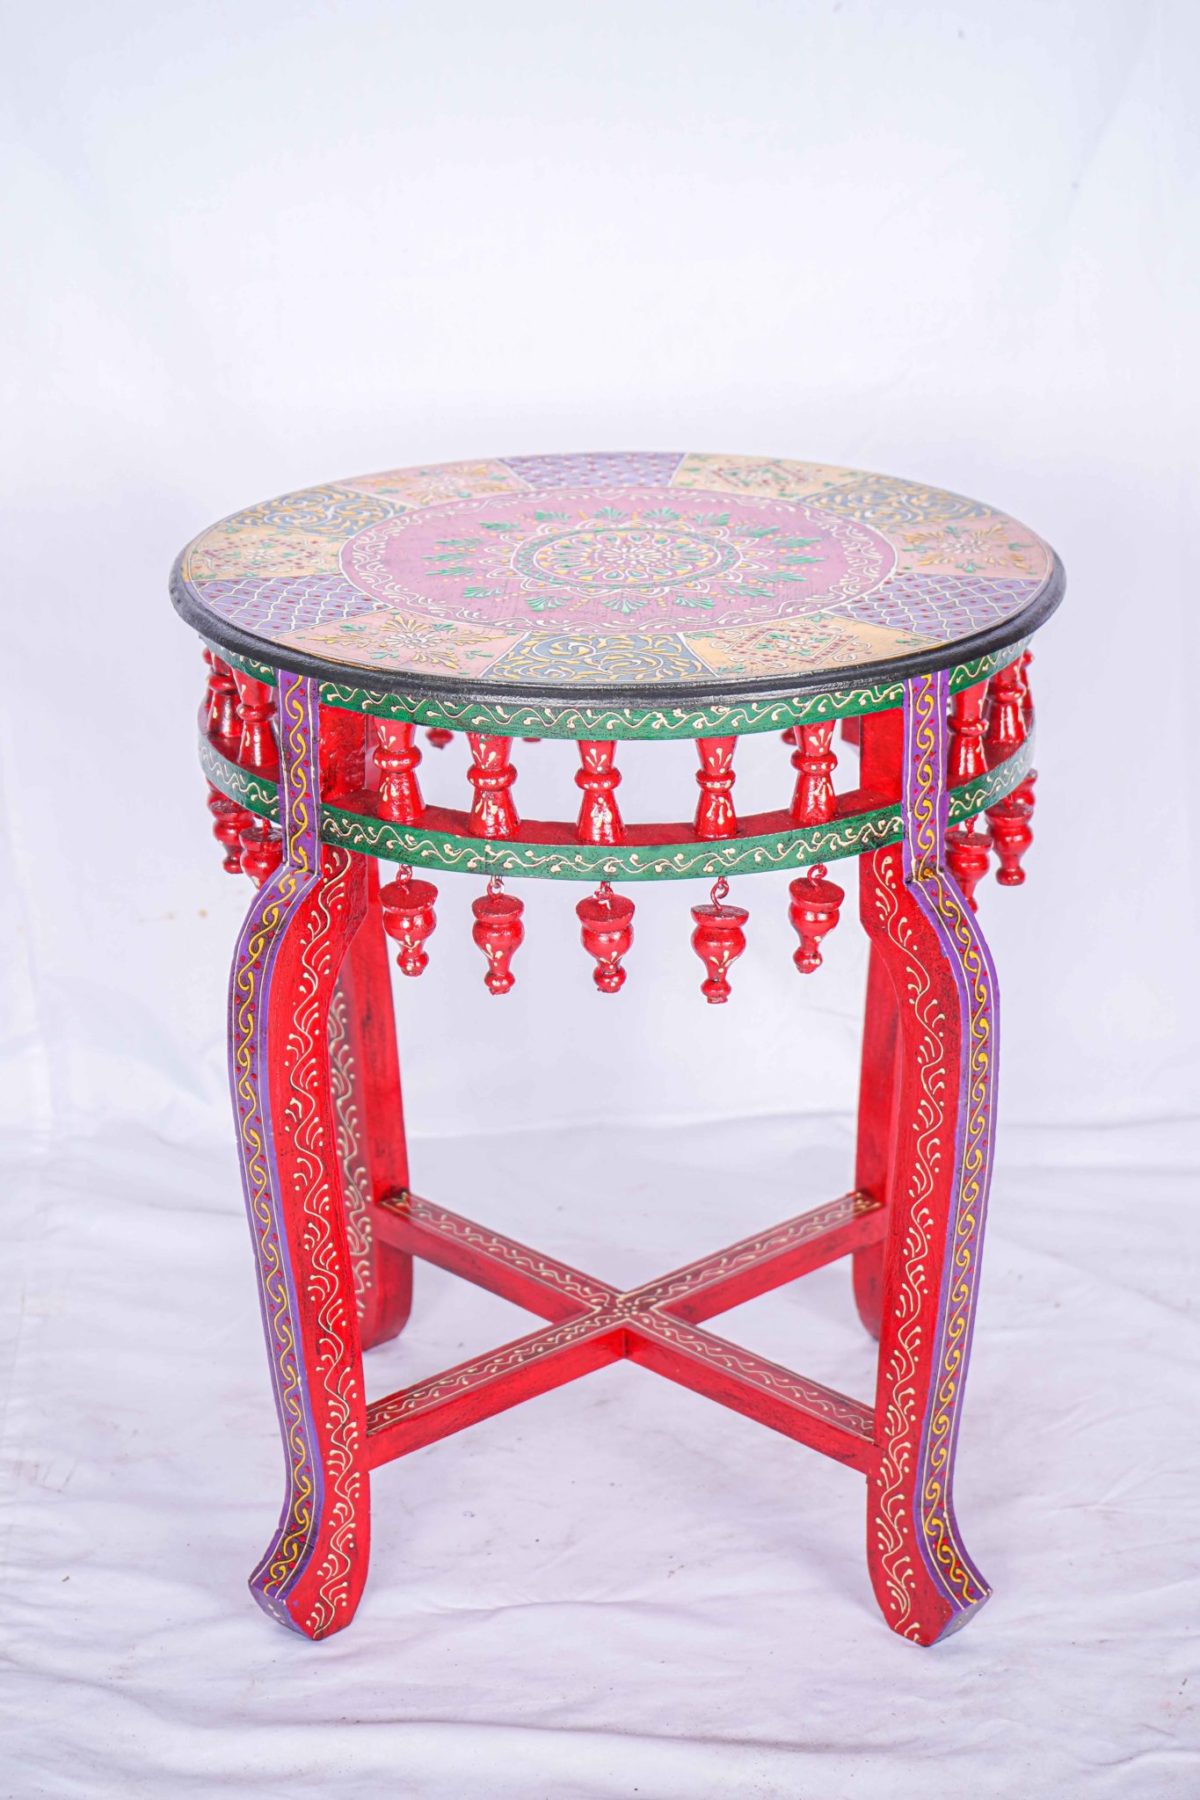 Matching Indian Furniture Bright Colourful Table